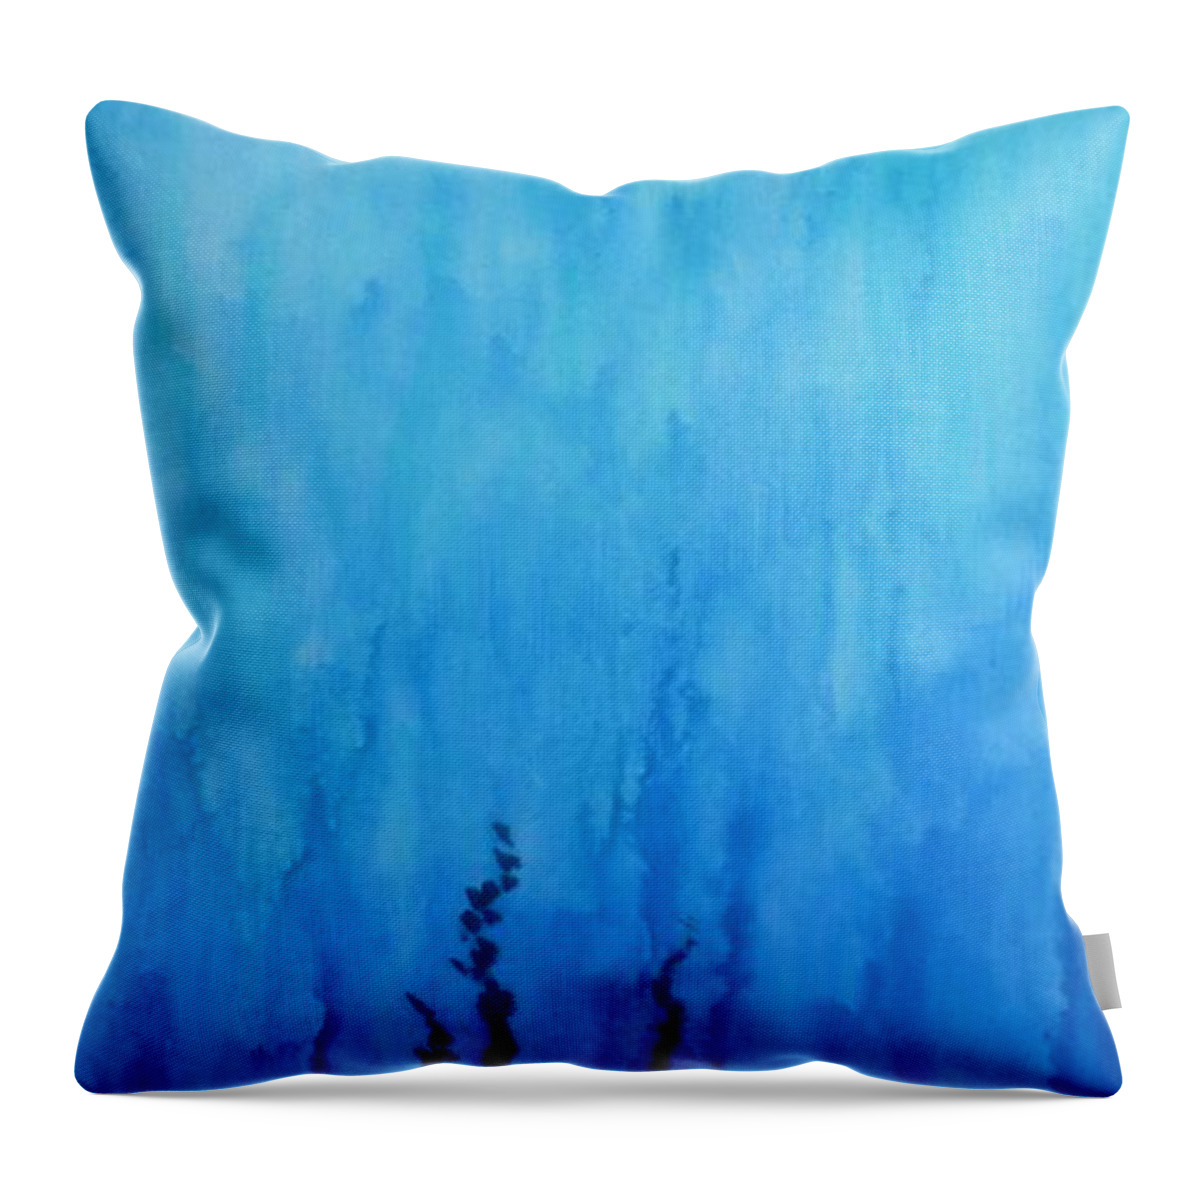 Blue Throw Pillow featuring the painting Blue Water by Monika Shepherdson